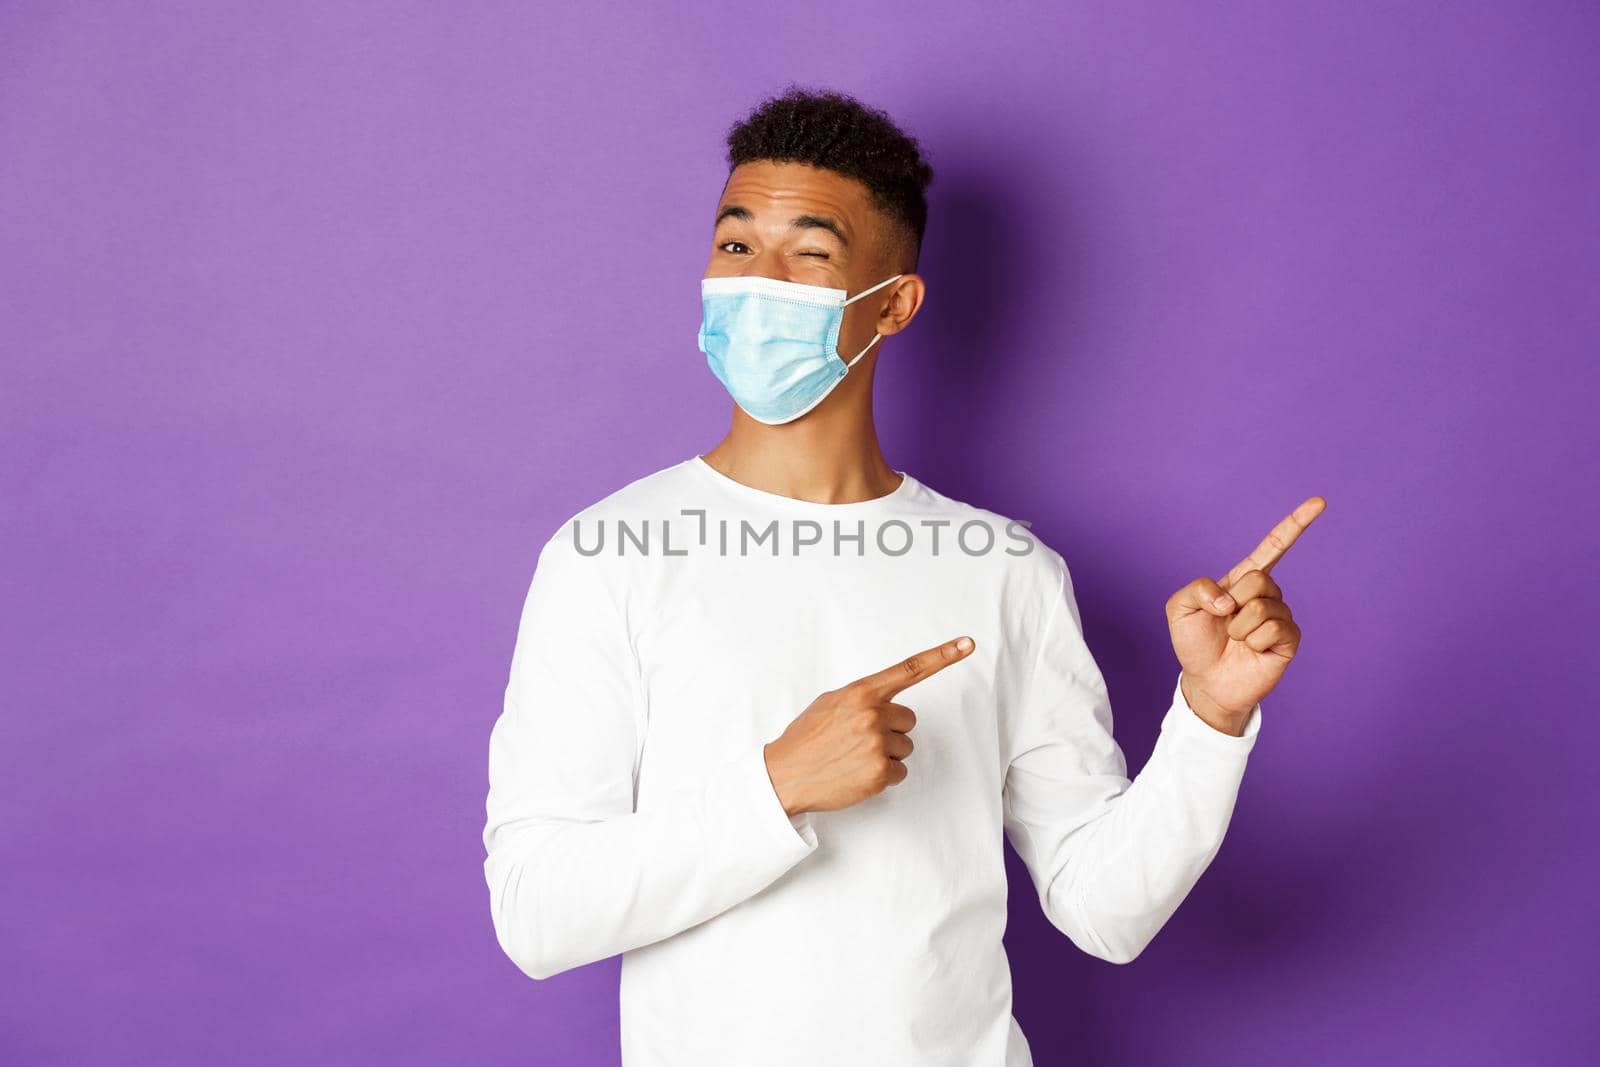 Concept of coronavirus, quarantine and lifestyle. Cheerful african-american guy in medical mask, winking and pointing at upper right corner, showing logo, standing over purple background.